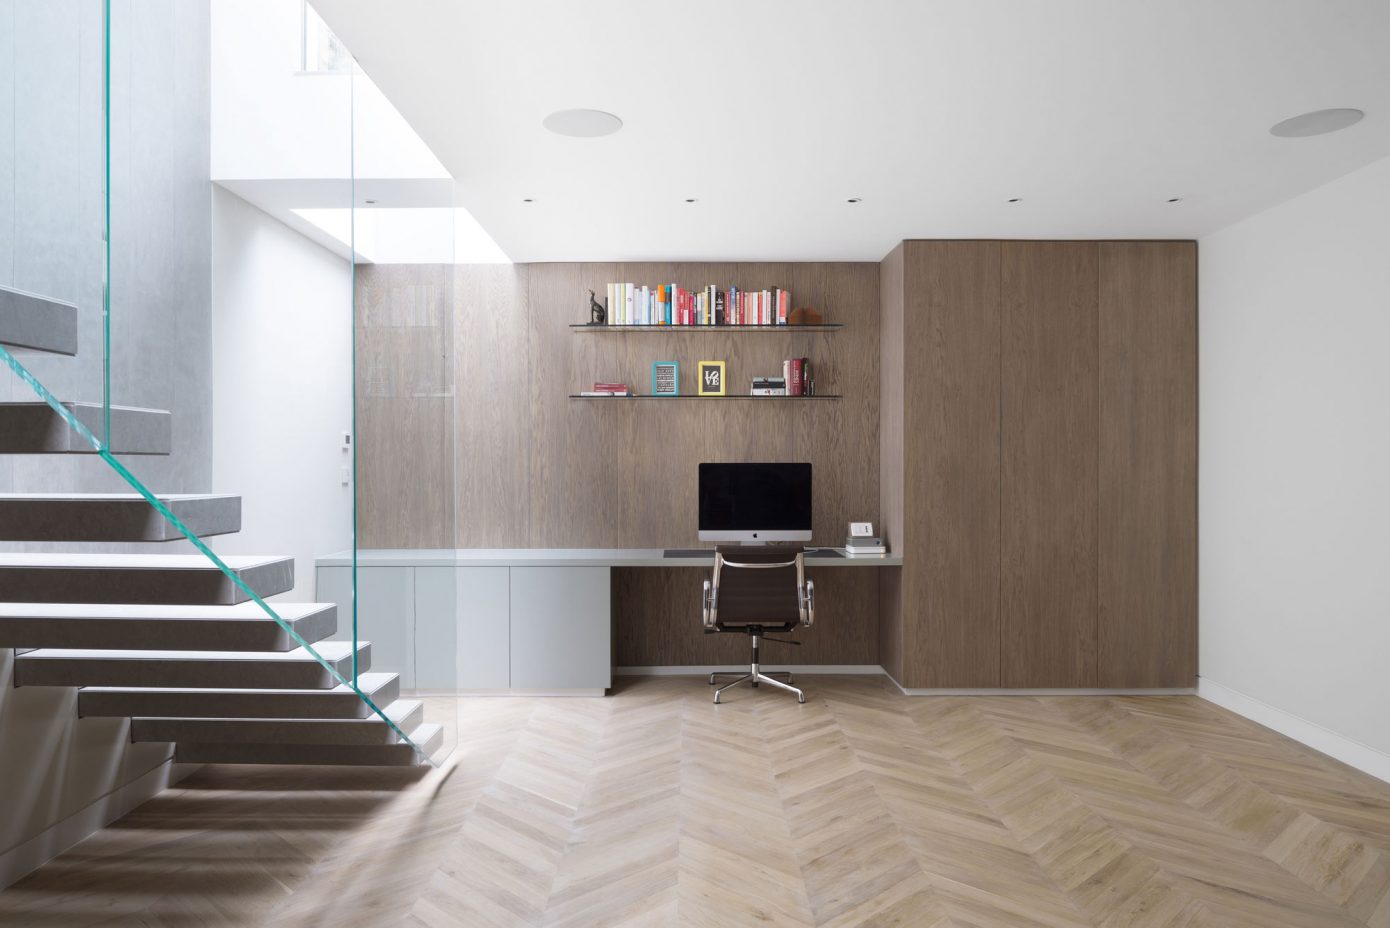 House in London by Emergent Design Studios